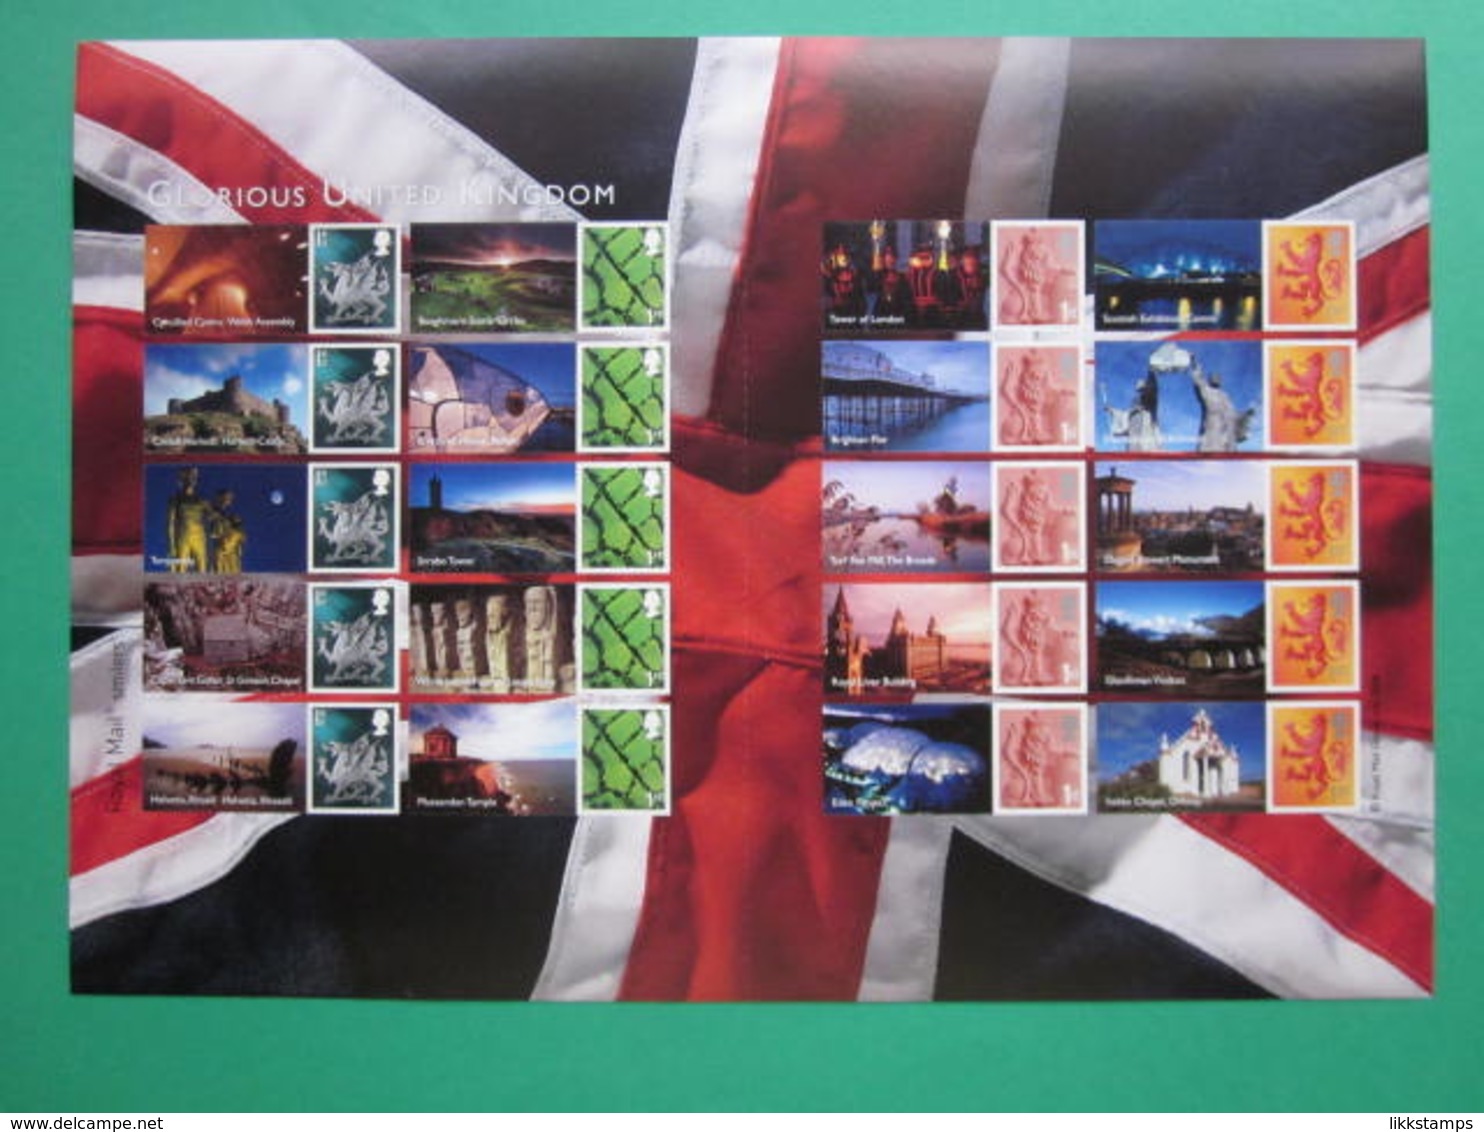 2008 ROYAL MAIL GLORIOUS UNITED KINGDOM GENERIC SMILERS SHEET. #SS0051 - Timbres Personnalisés